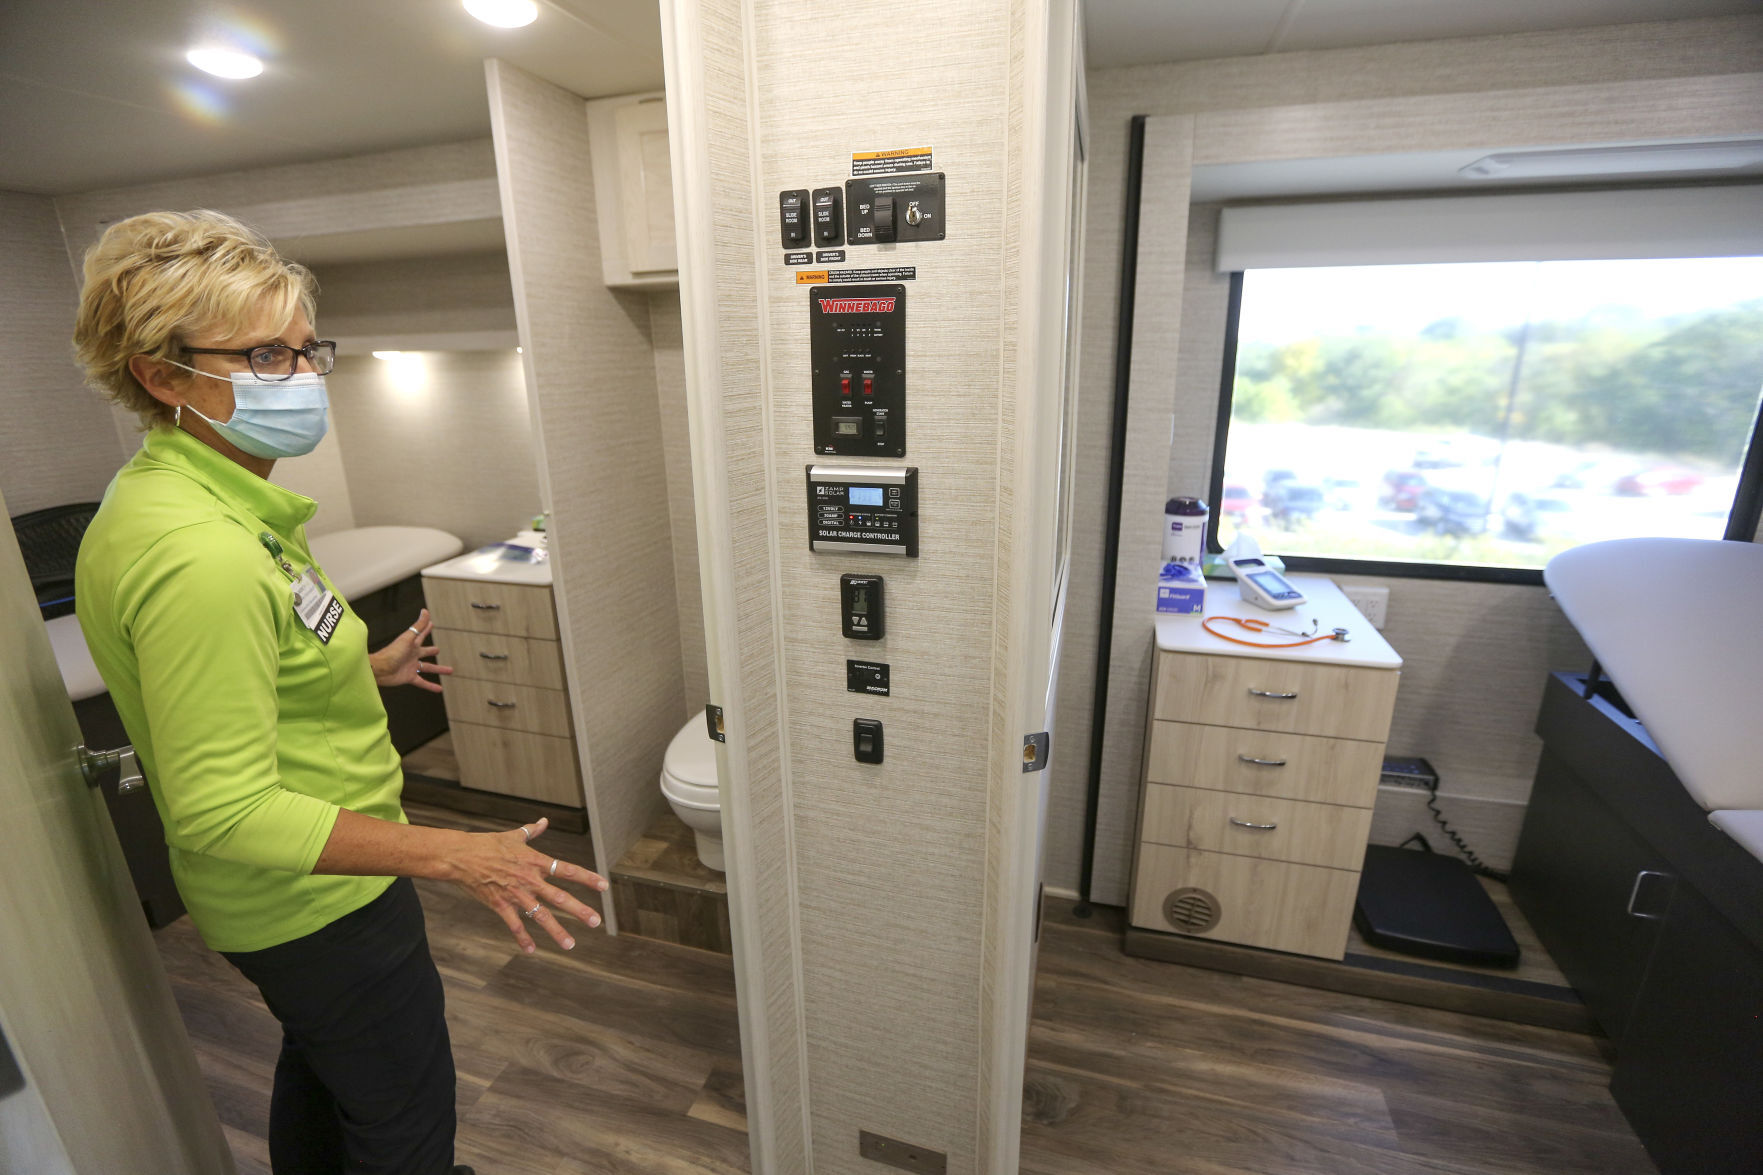 Michelle Arensdorf, MercyOne Dubuque community education and wellness coordinator and a registered nurse, gives a tour of the new mobile medical unit housed within a 31-foot RV on Tuesday. The handicap-accessible mobile medical unit includes two full exam rooms, a waiting area and bathroom.    PHOTO CREDIT: Dave Kettering